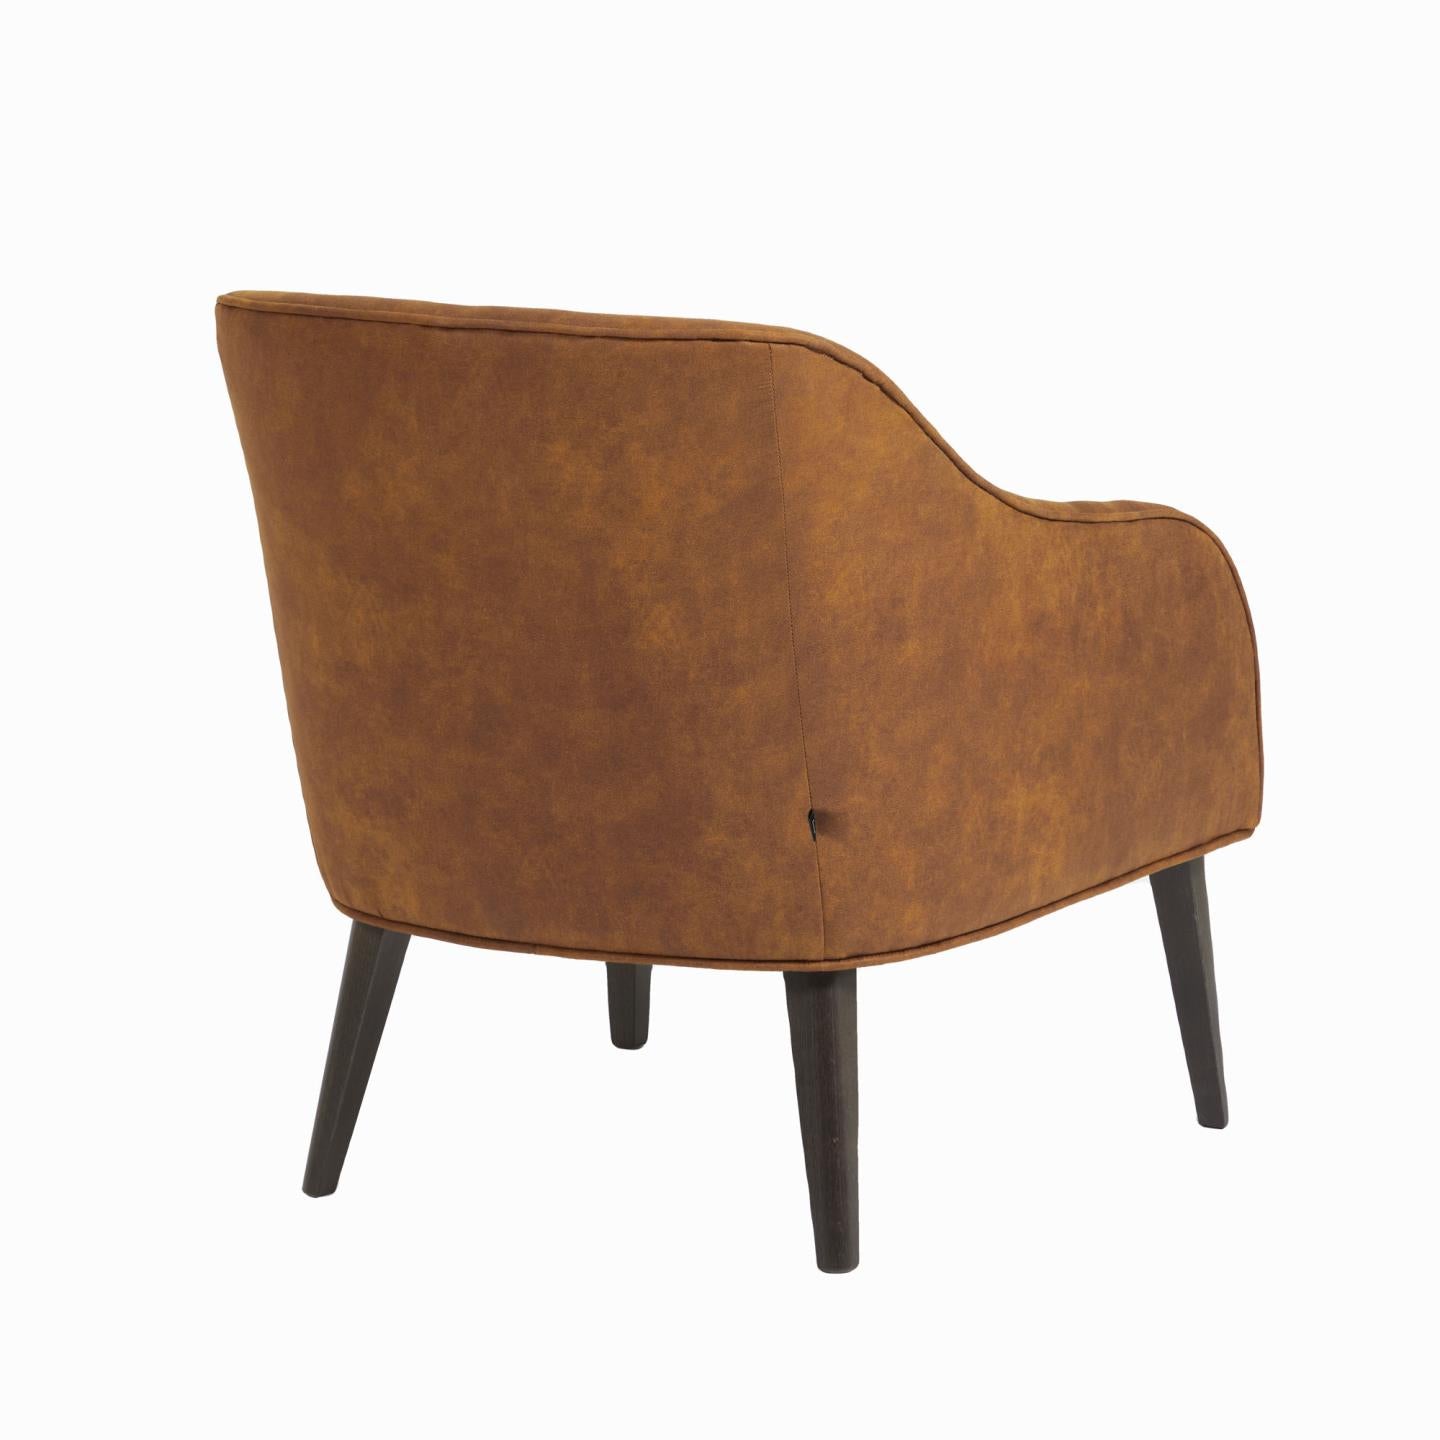 Bobly armchair in light brown fabric with wenge finish legs